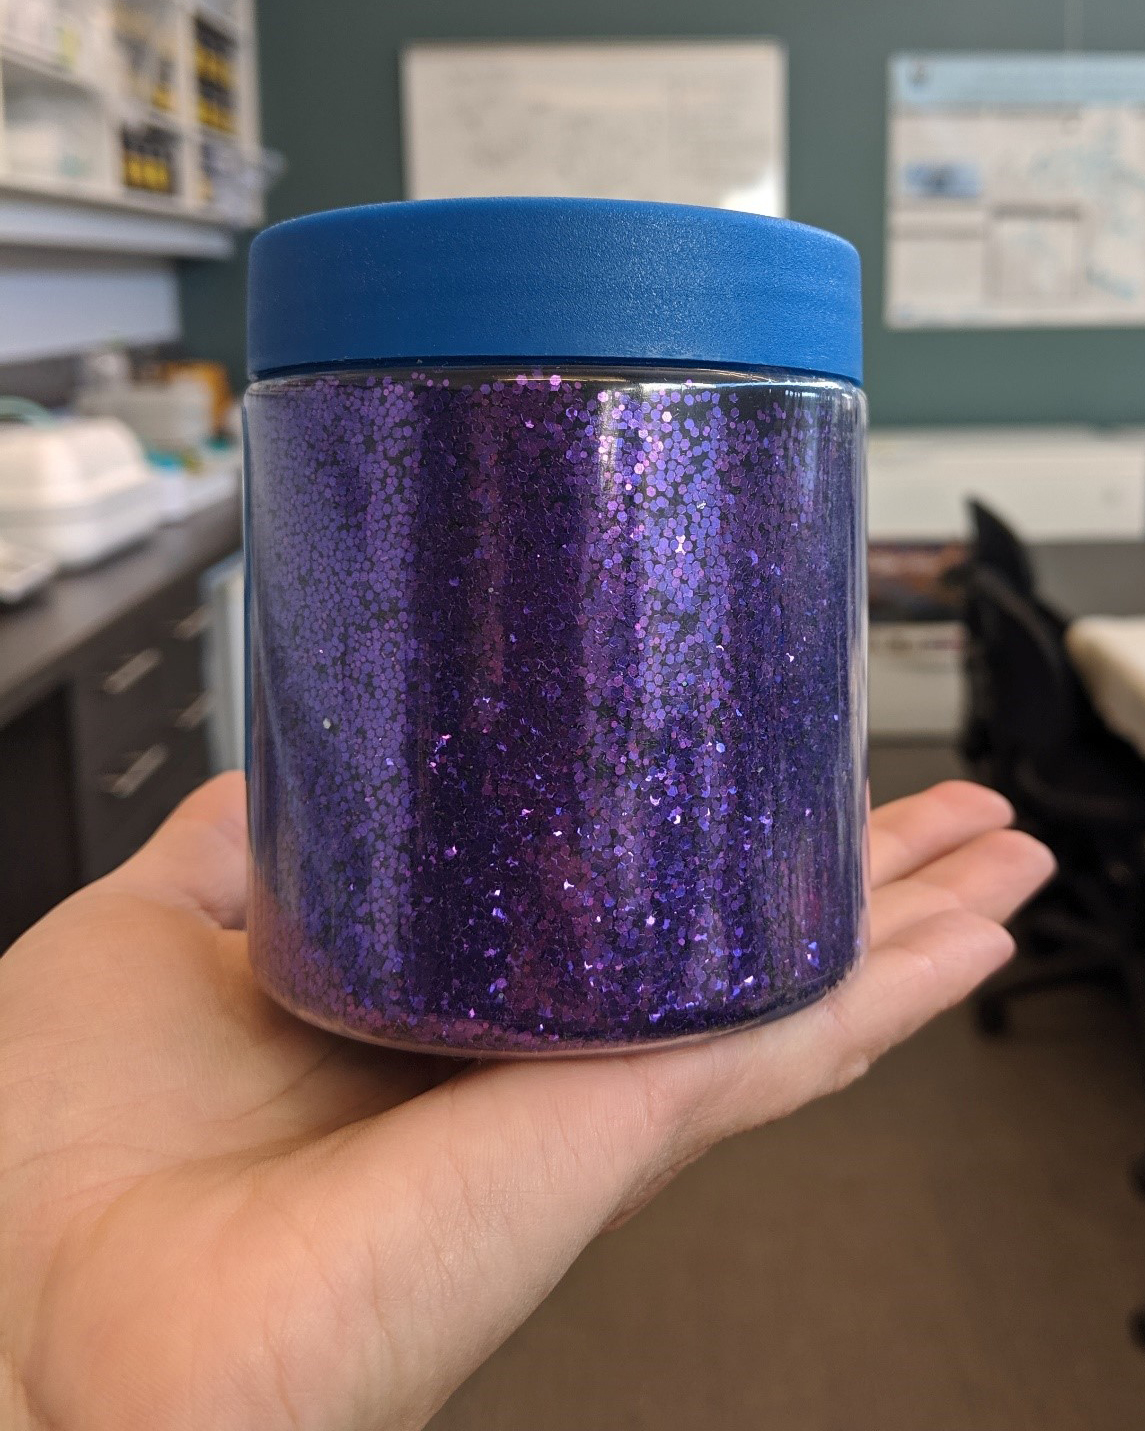 A large container of purple glitter